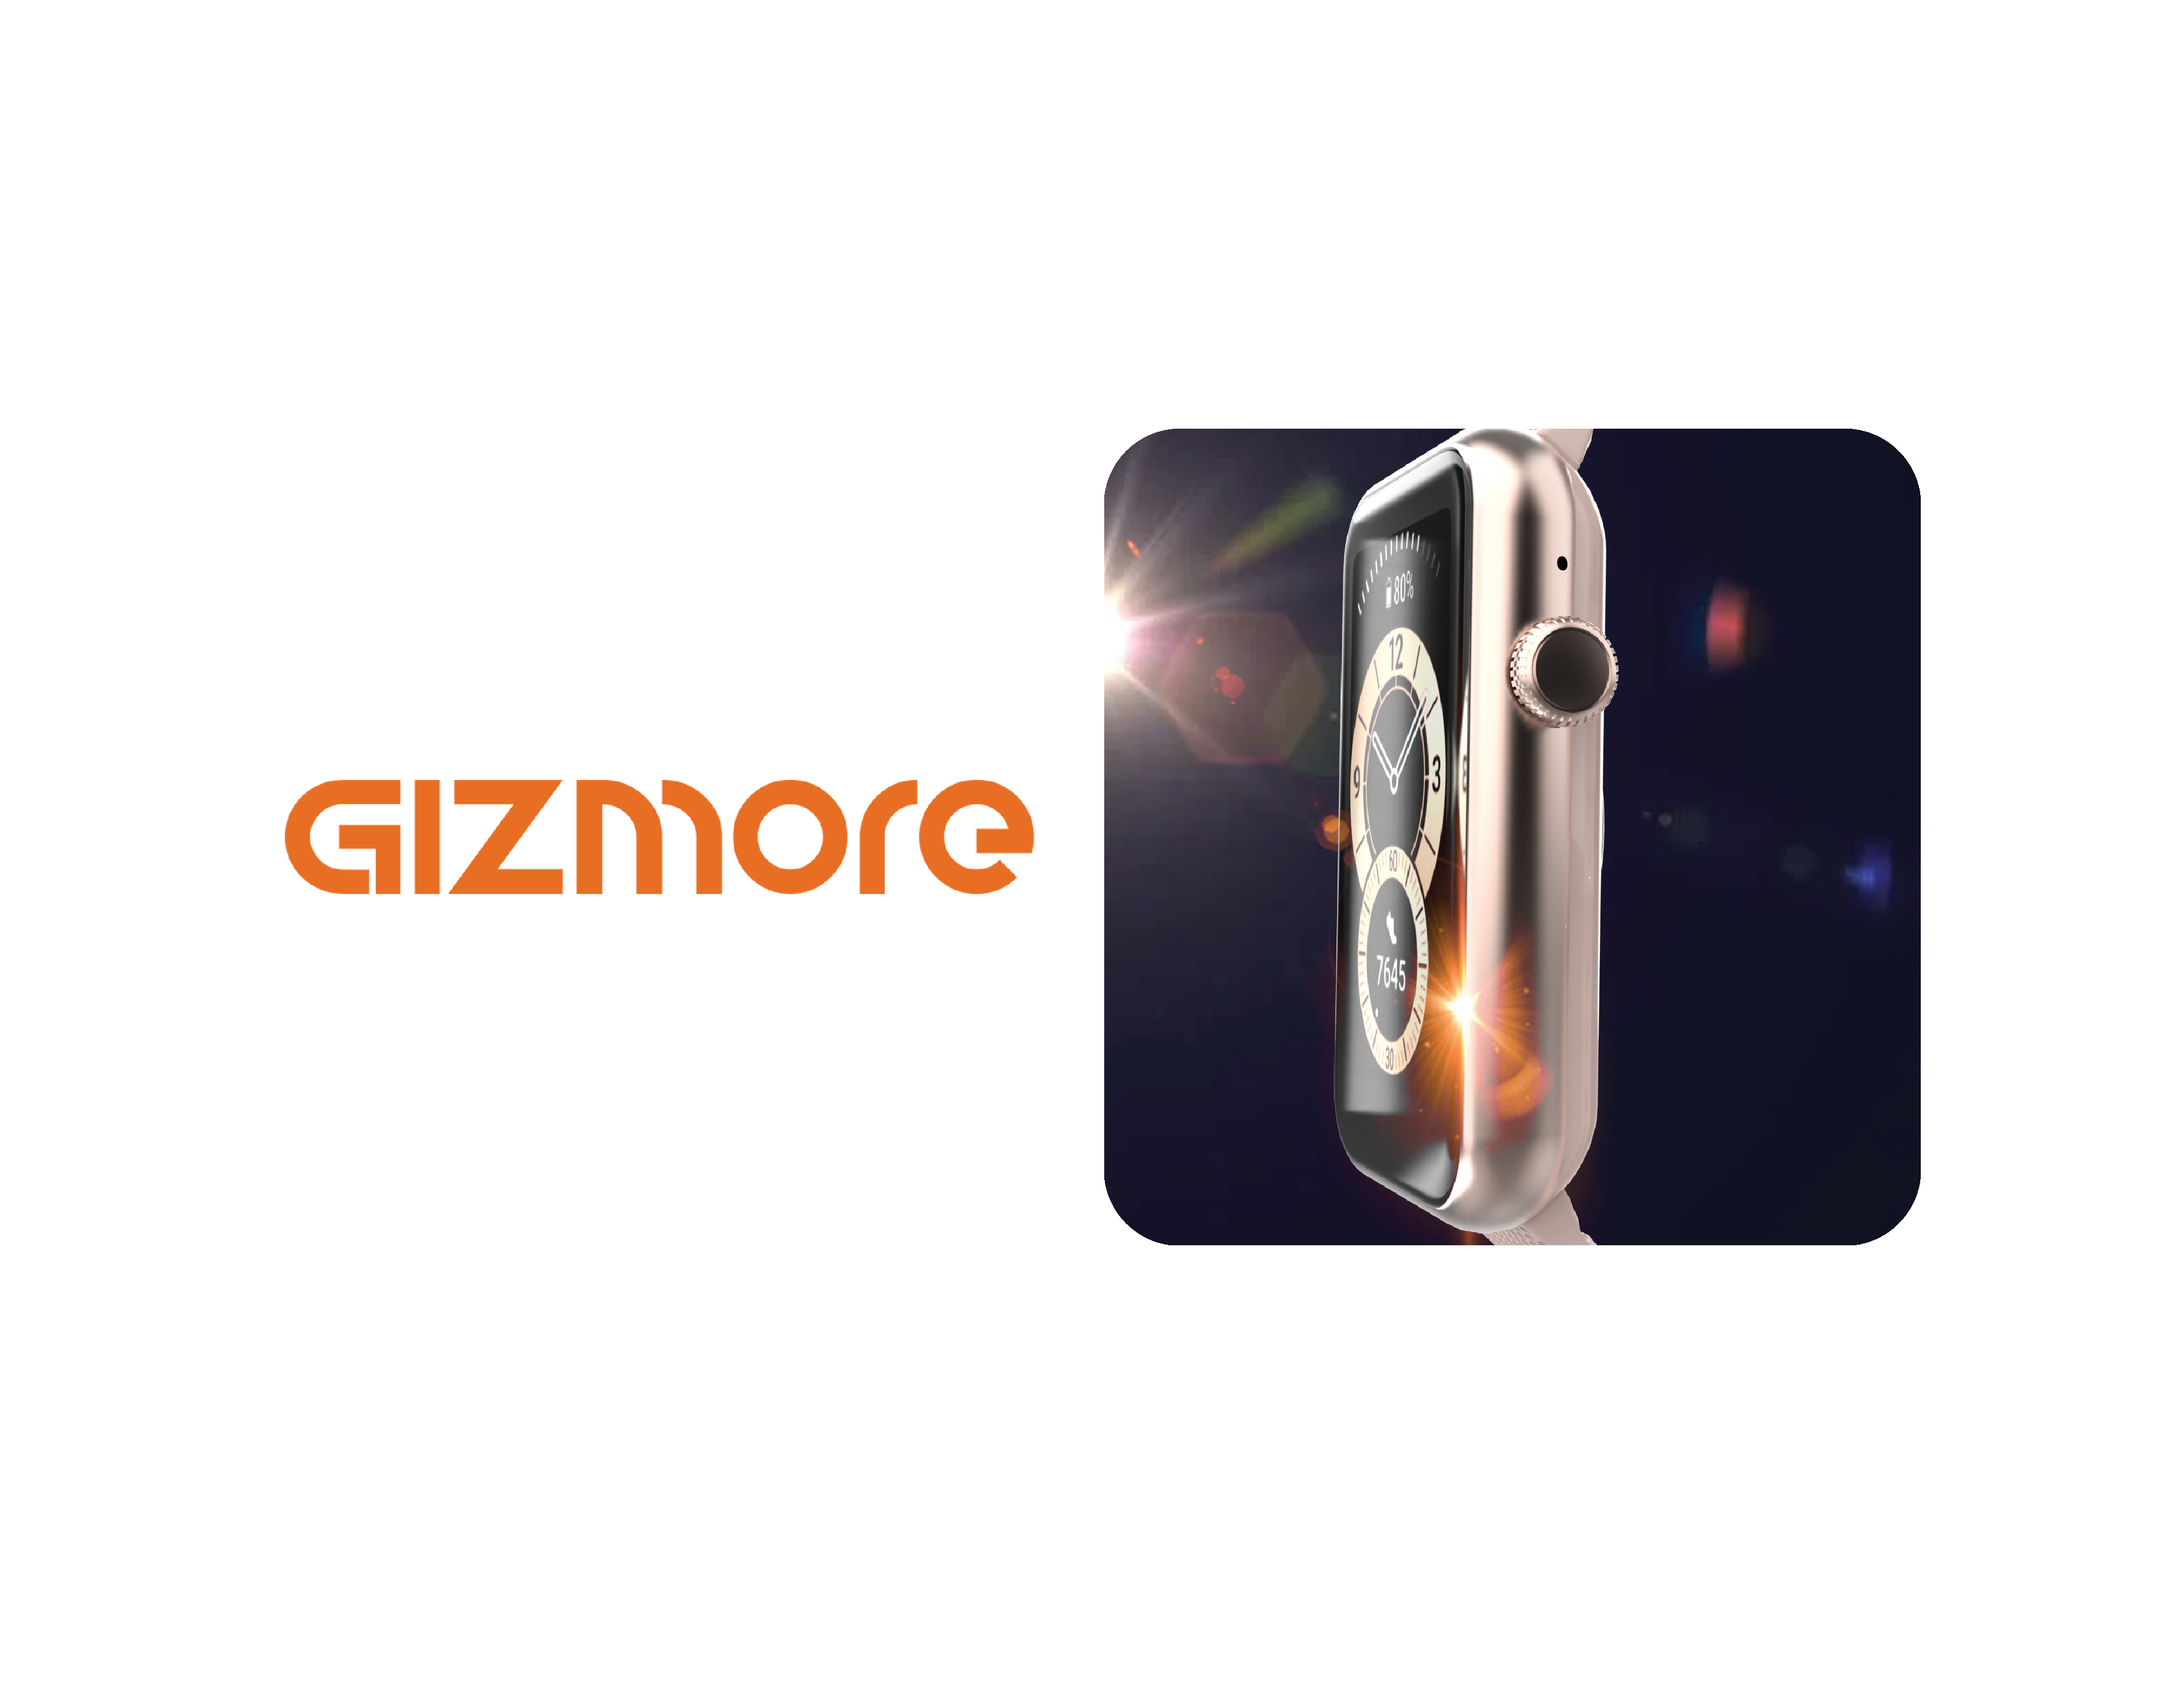 Gizmore to launch women-centric calling smartwatch for Rs 2,800